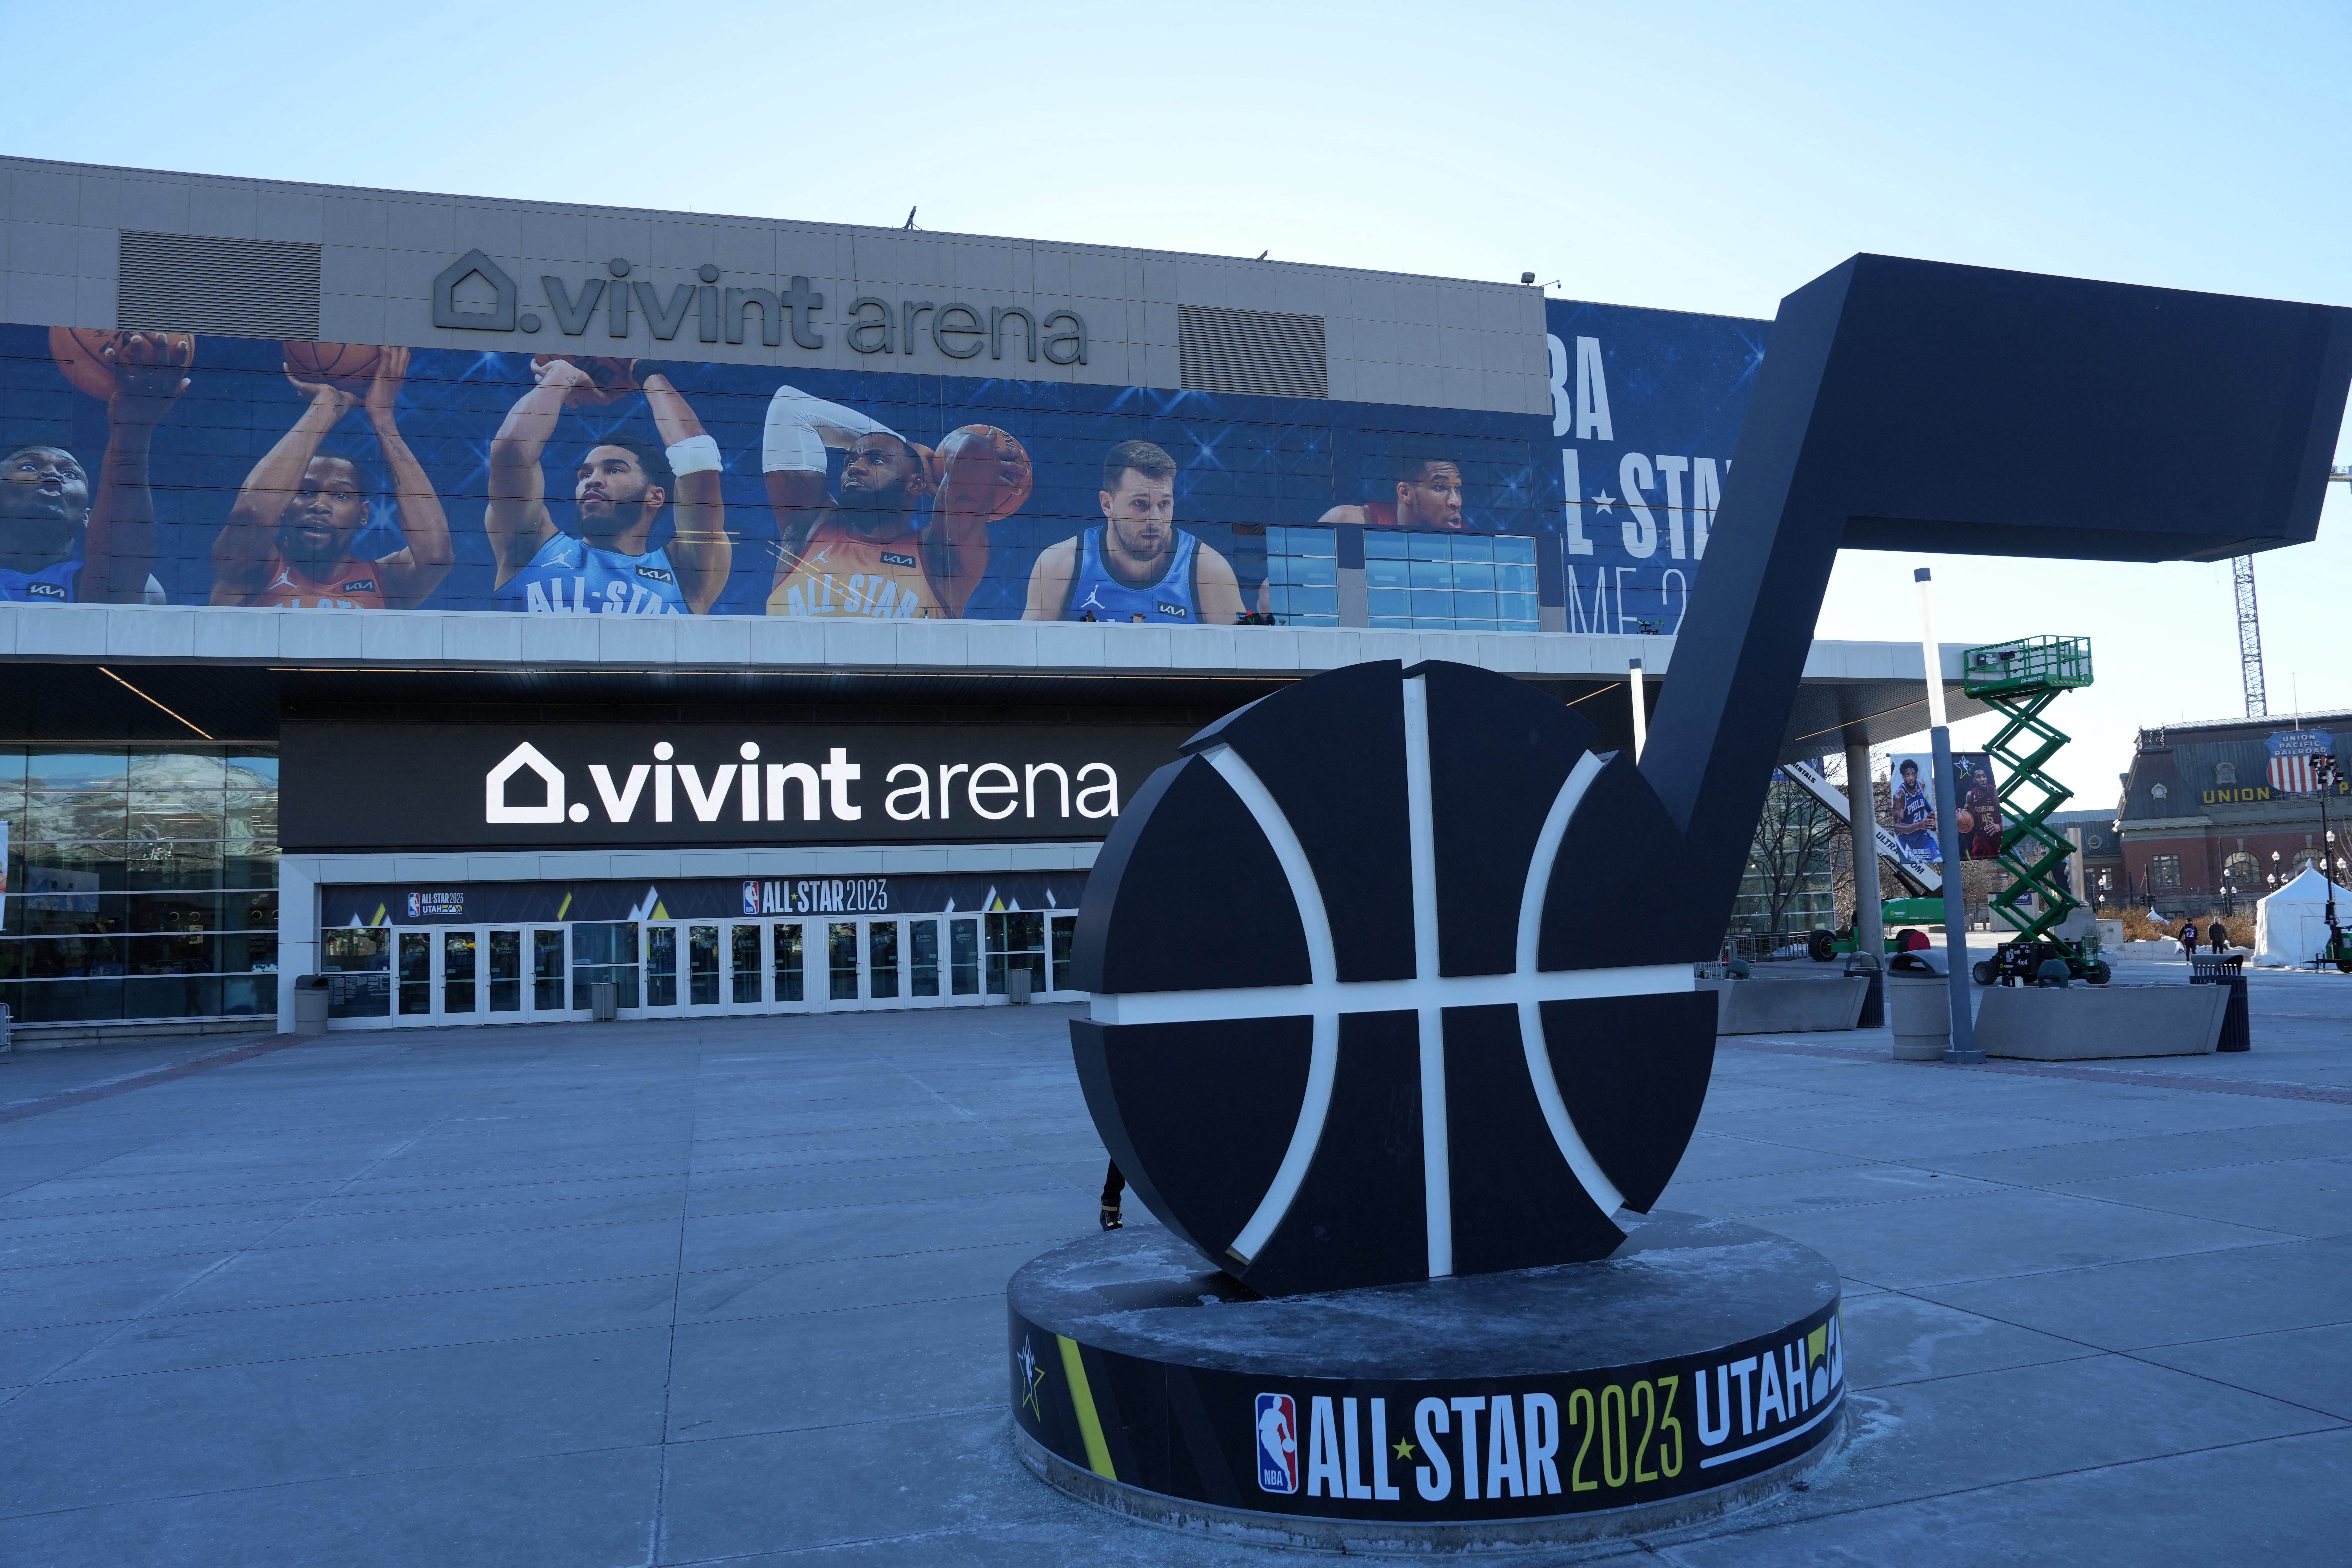 Feb 16, 2023; Salt Lake City, UT, USA; A general overall view of the Vivint Arena, the site of the 2023 NBA All-Star Game. Mandatory Credit: Kirby Lee-USA TODAY Sports